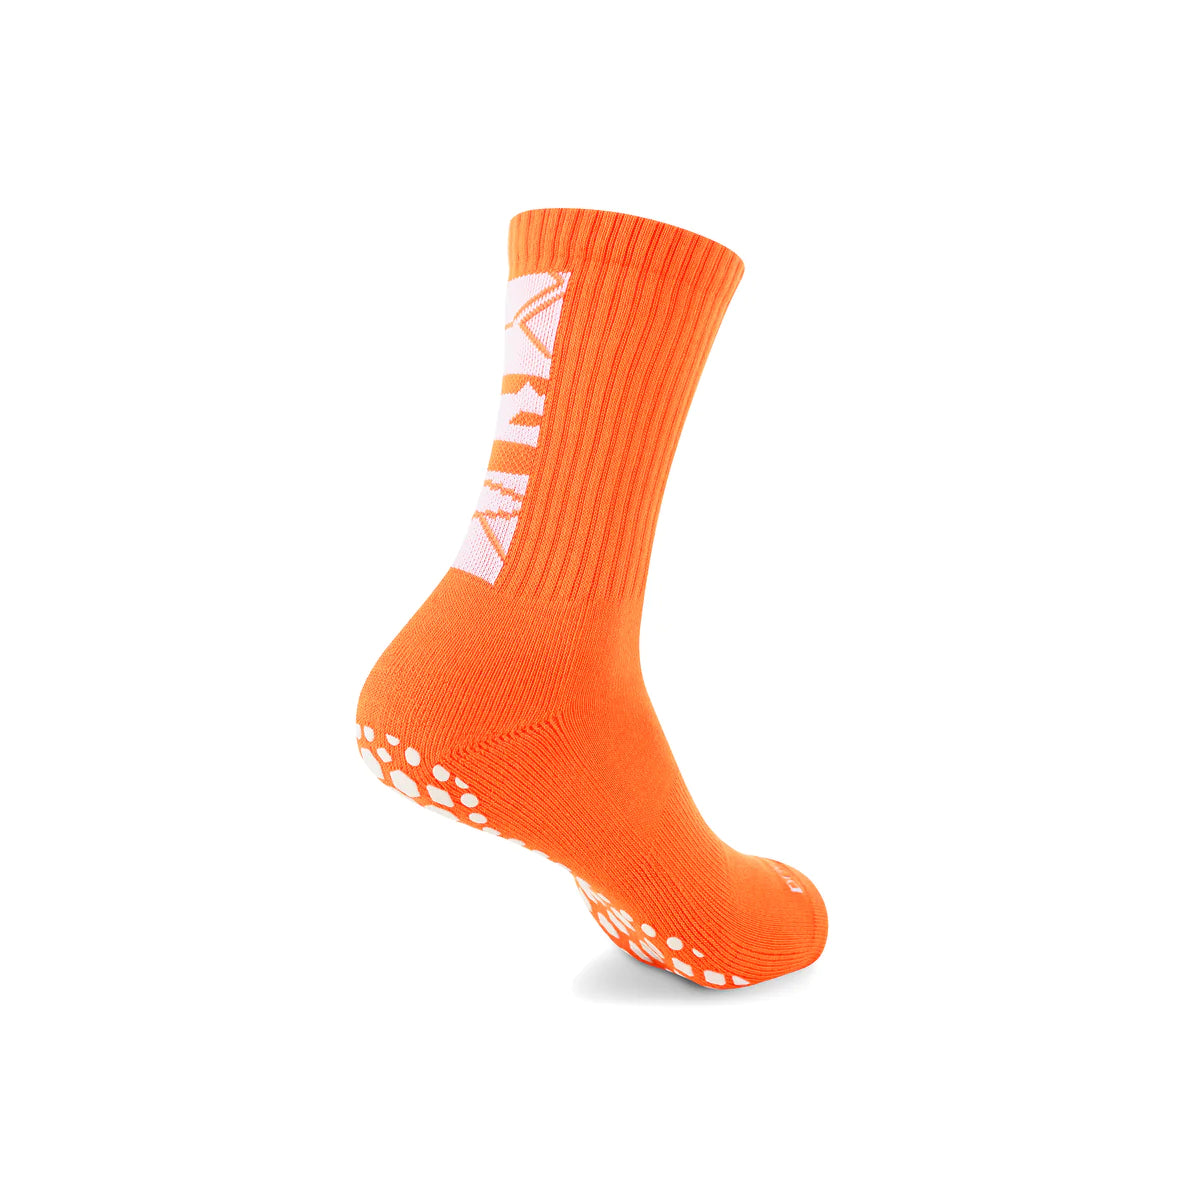 Zyphr Cushioned Grip Socks Mid-Calf Length Wide Fit Version